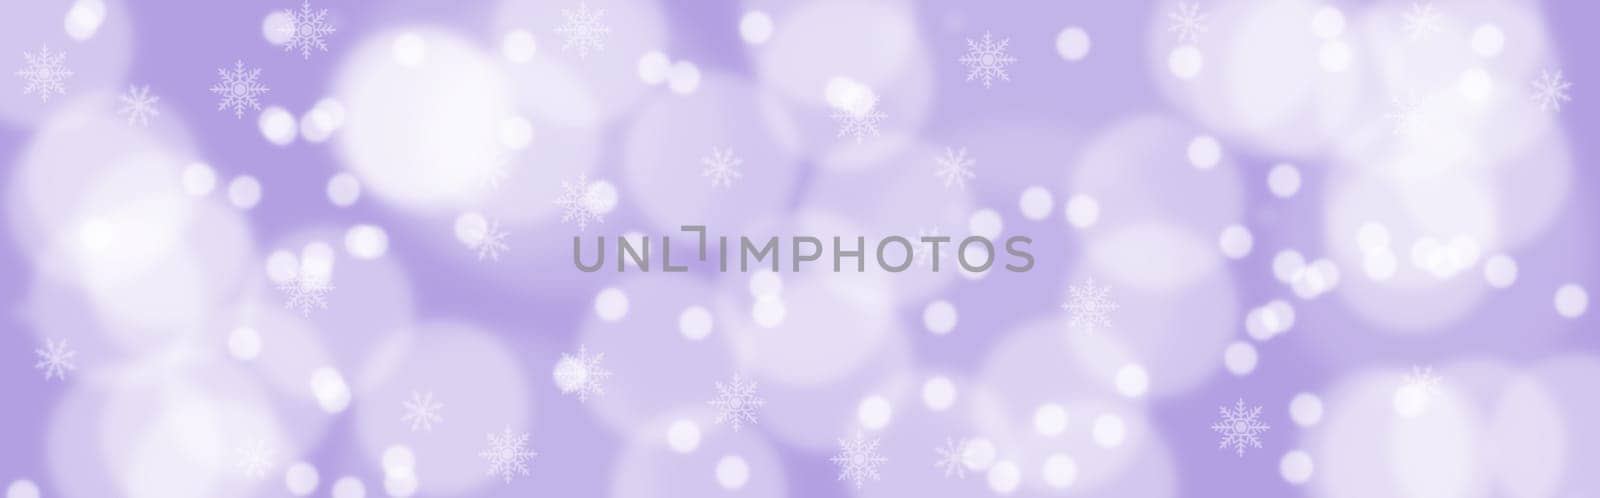 Abstract and colorful decorative background with bright stars